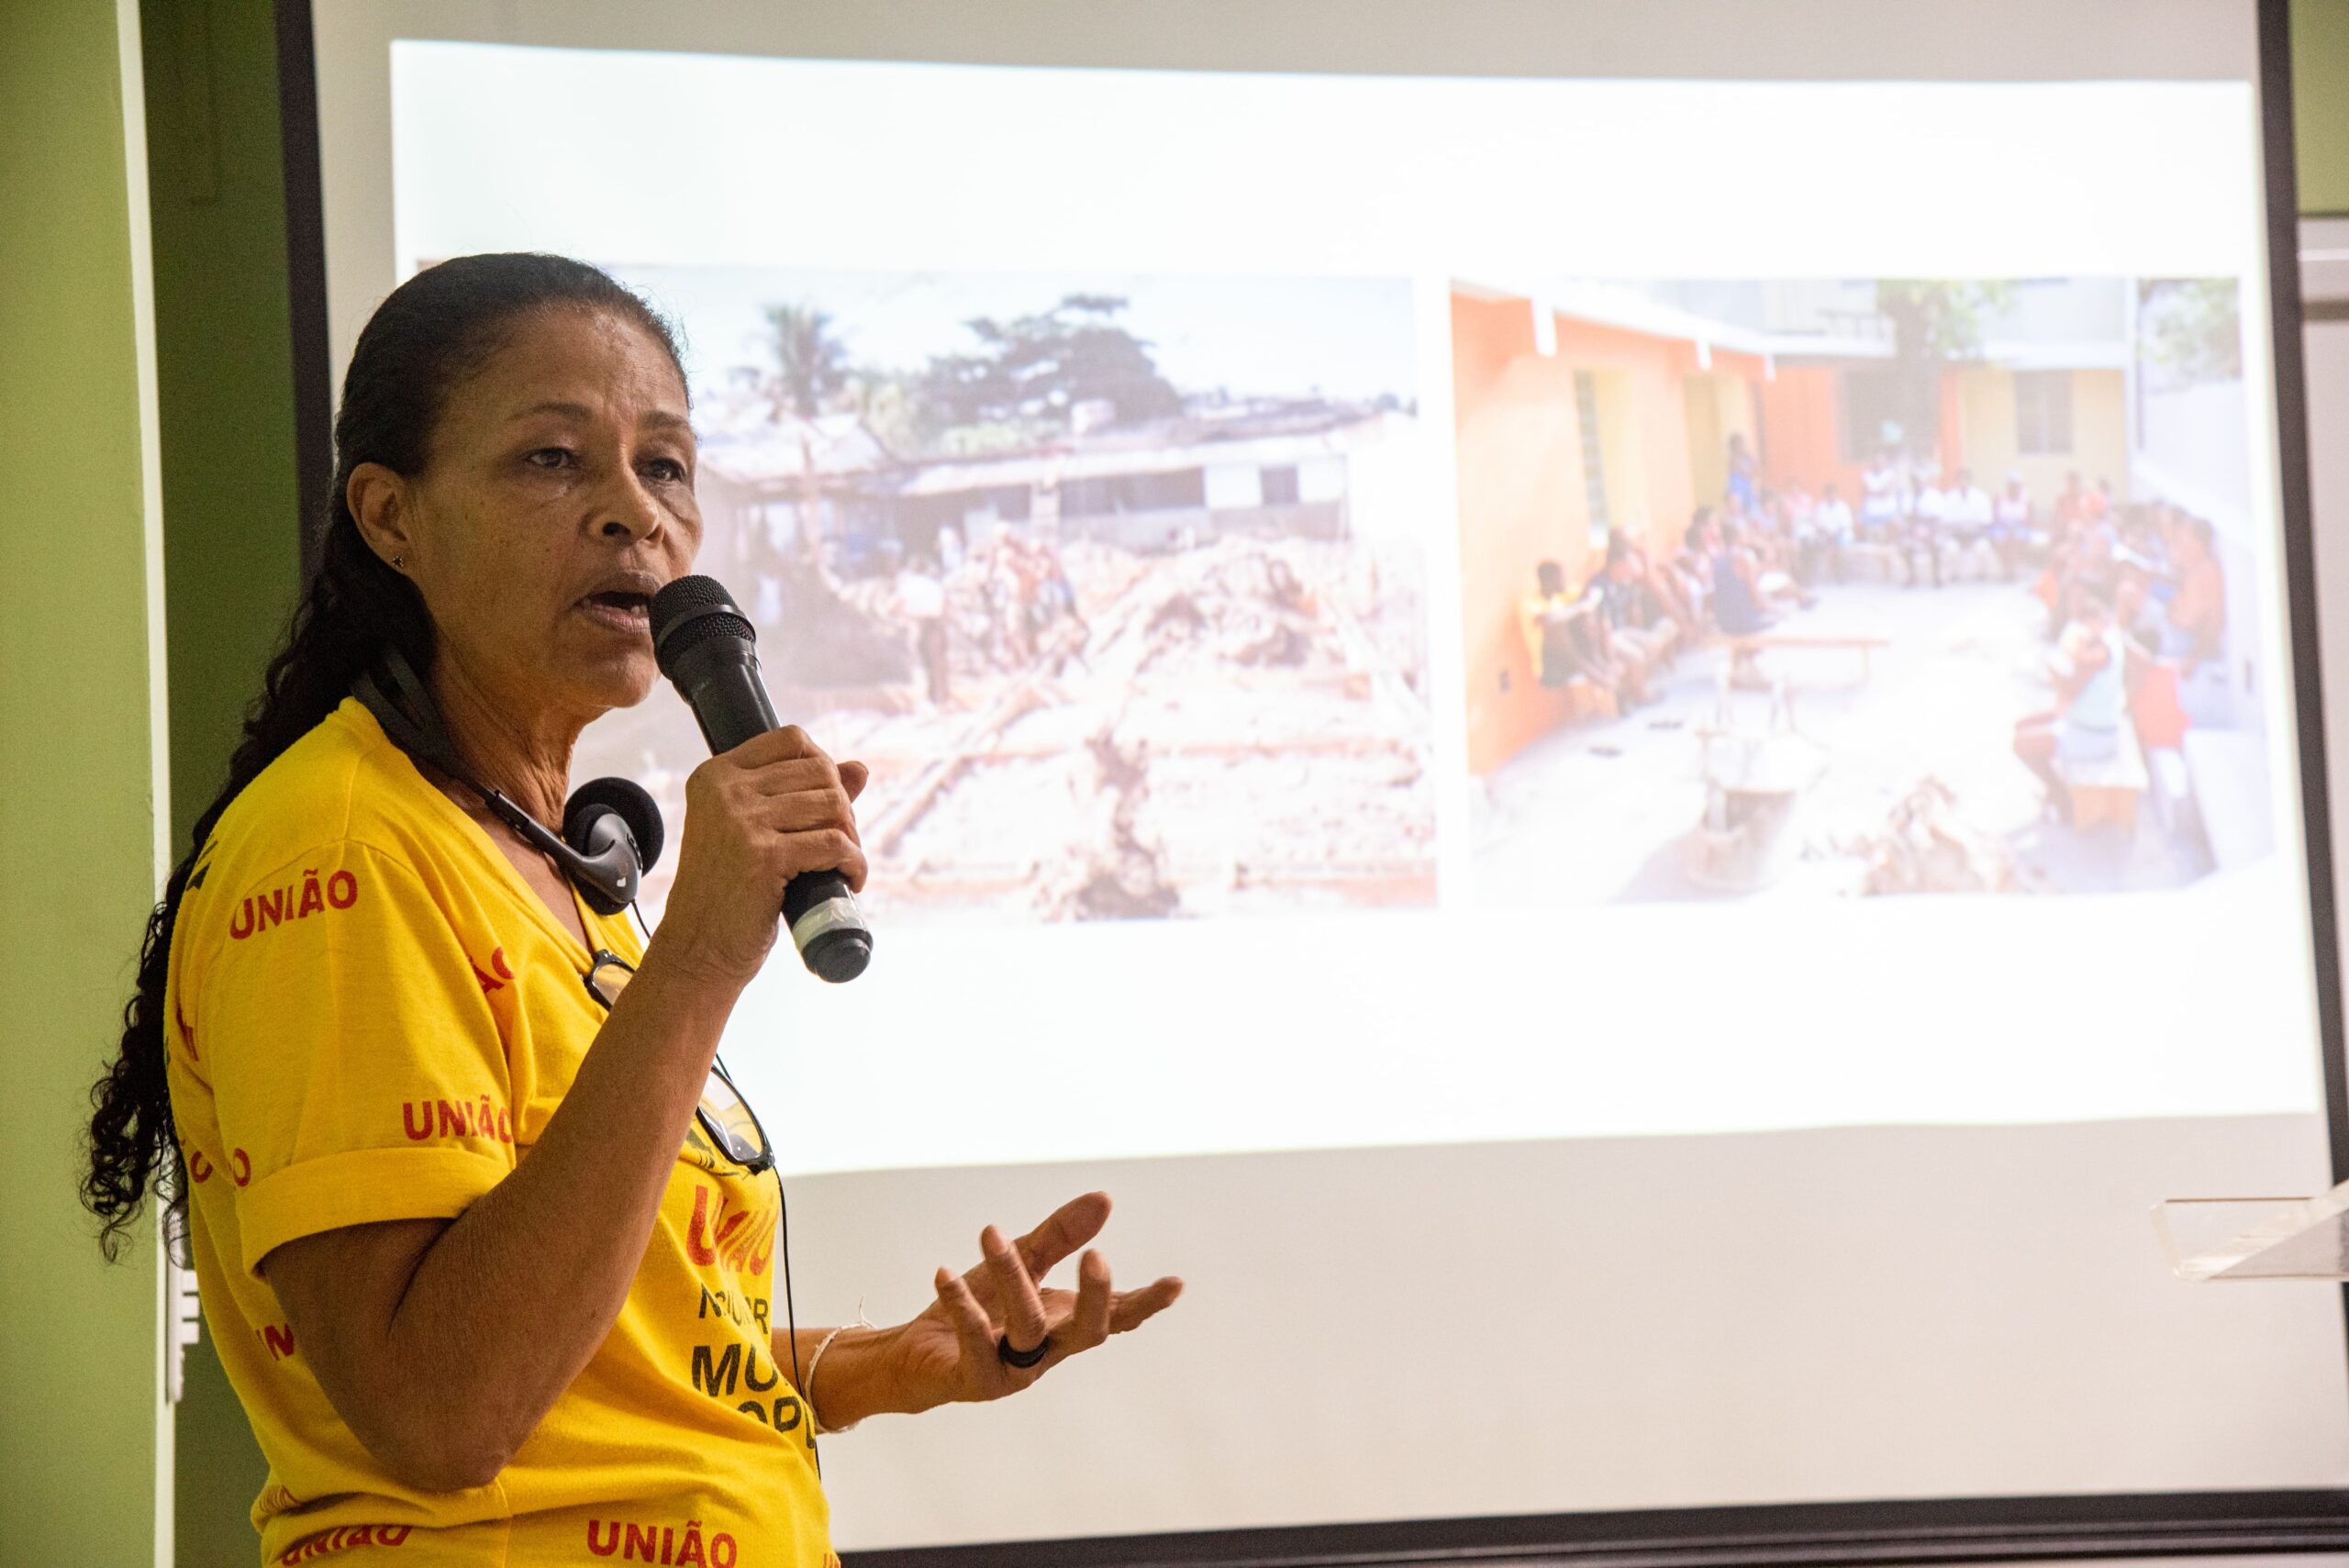 Jurema Constâncio, member of the National Union for Popular Housing (UNMP) and community leader from the Shangri-Lá Cooperative, speaks about the experience of the pioneering housing cooperative she belongs to. Photo: Bárbara Dias